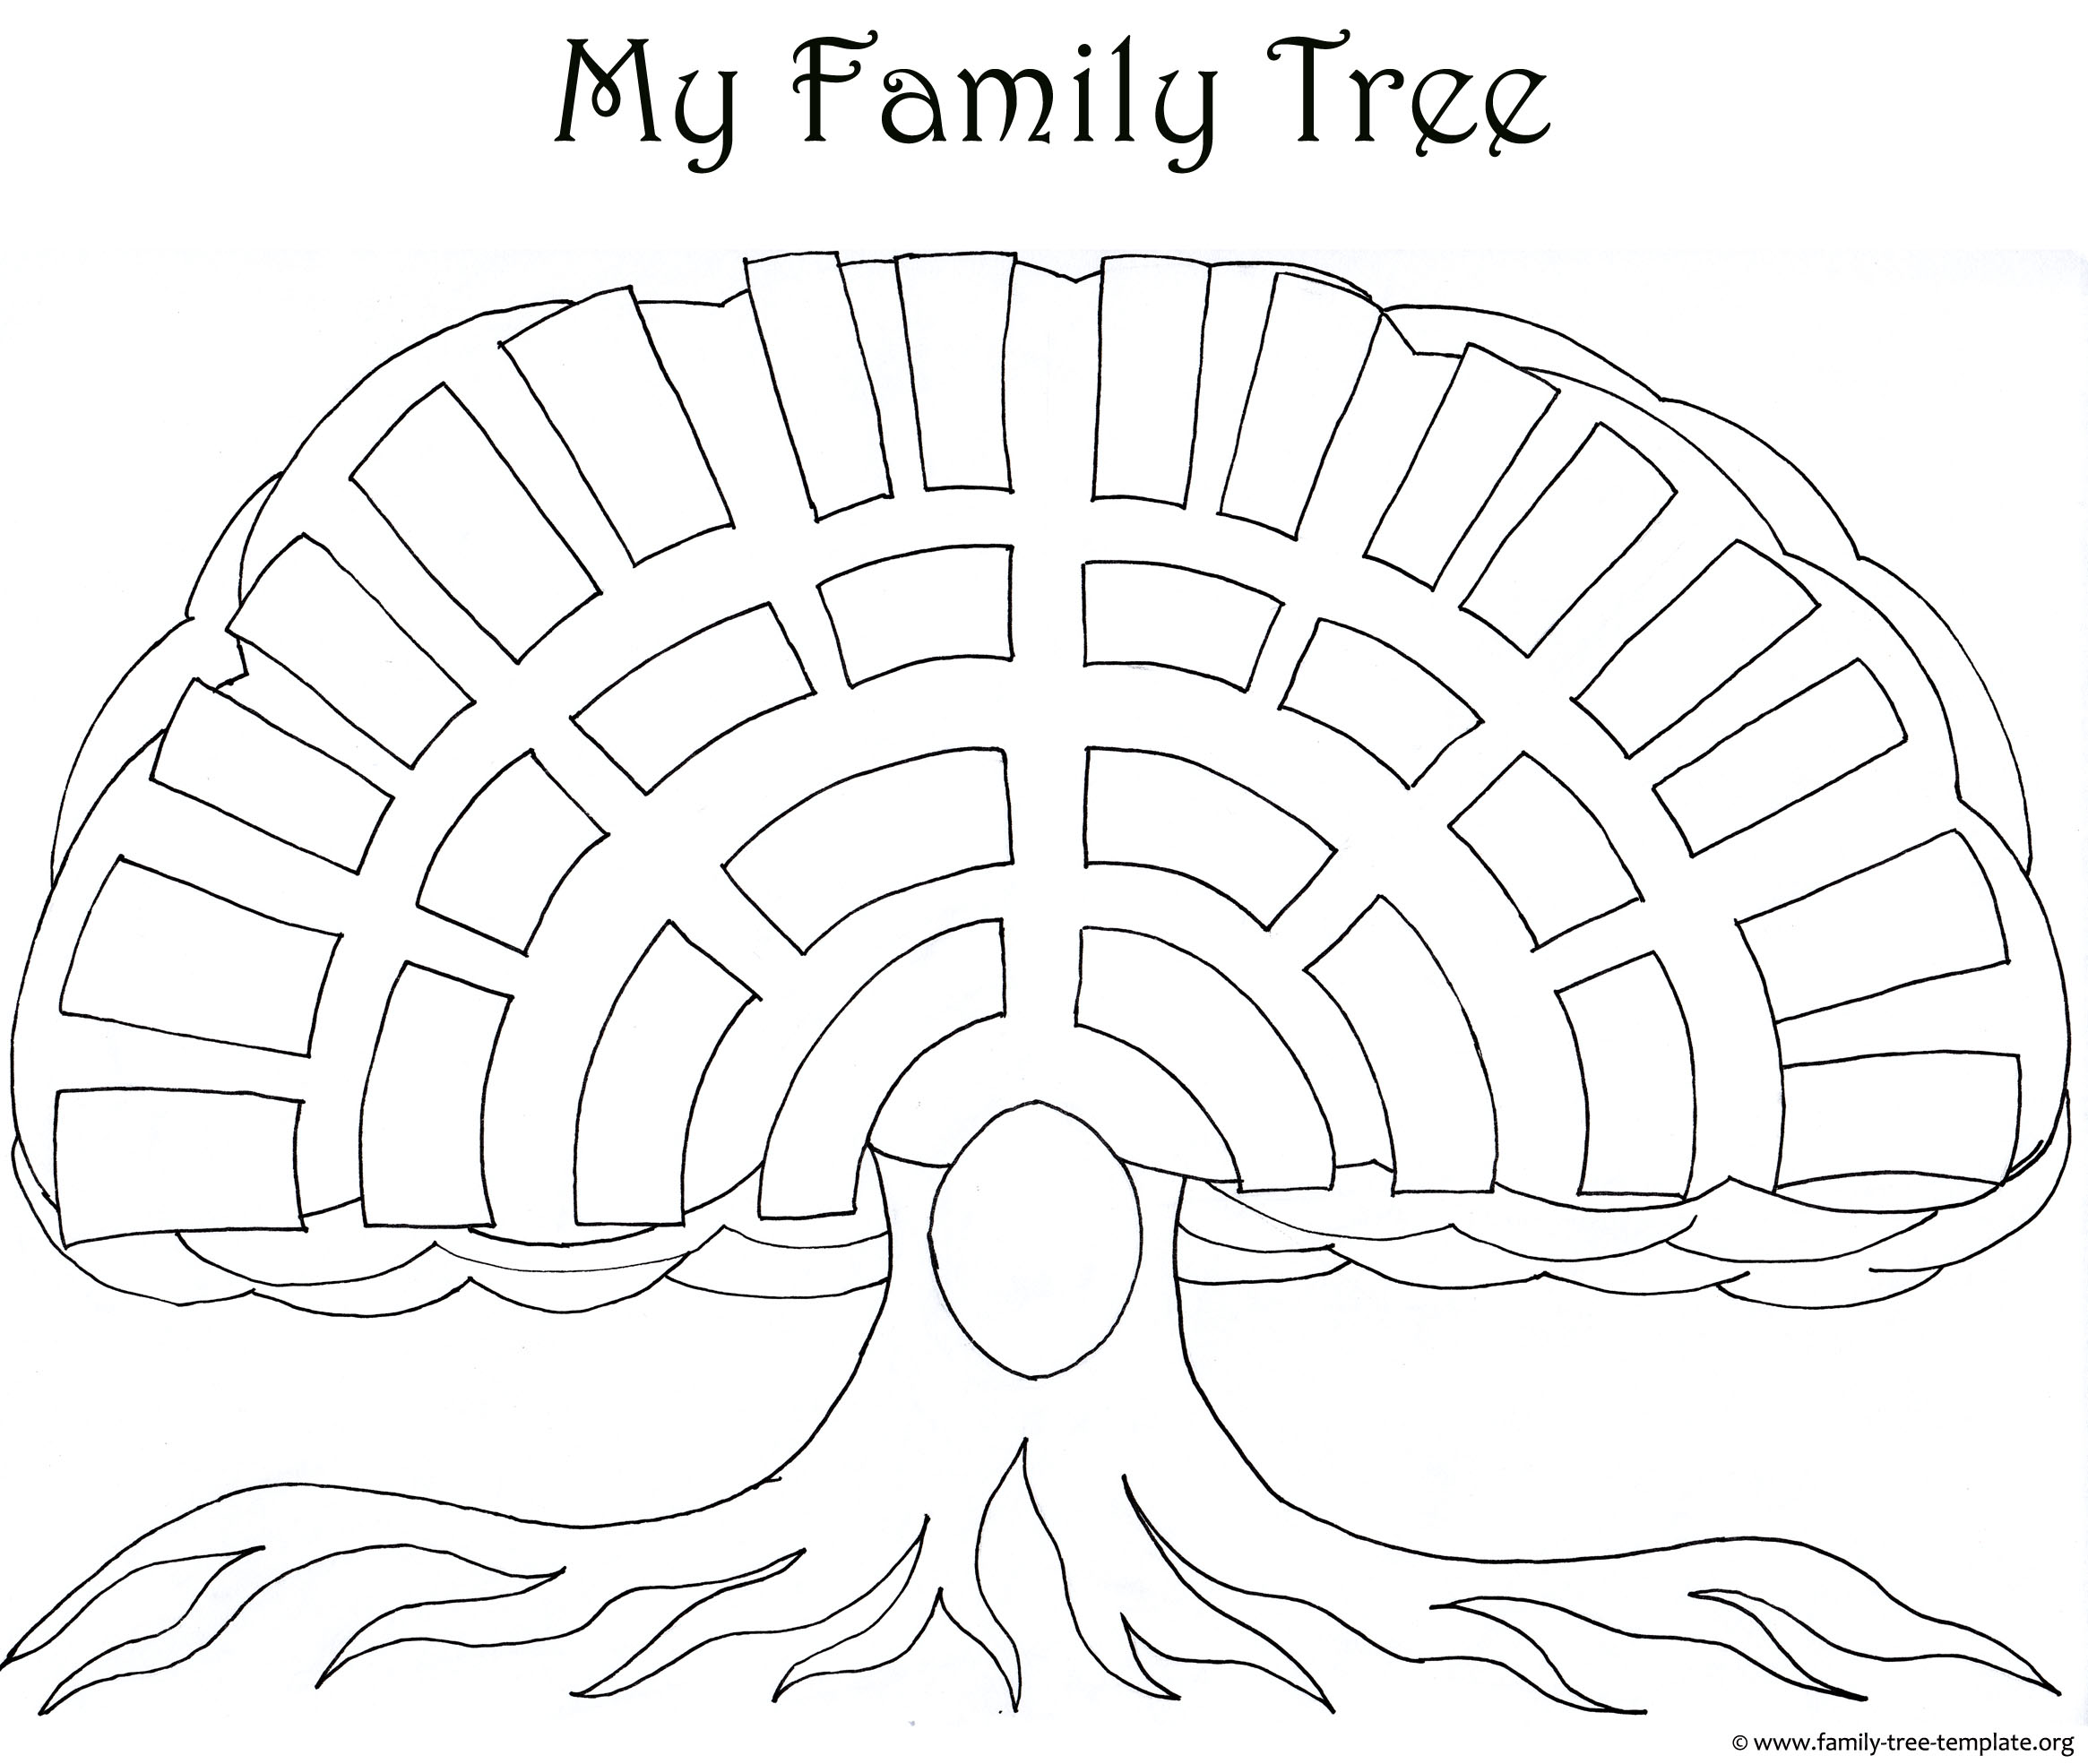 Big oak family tree template as a coloring page for kids and their parents.